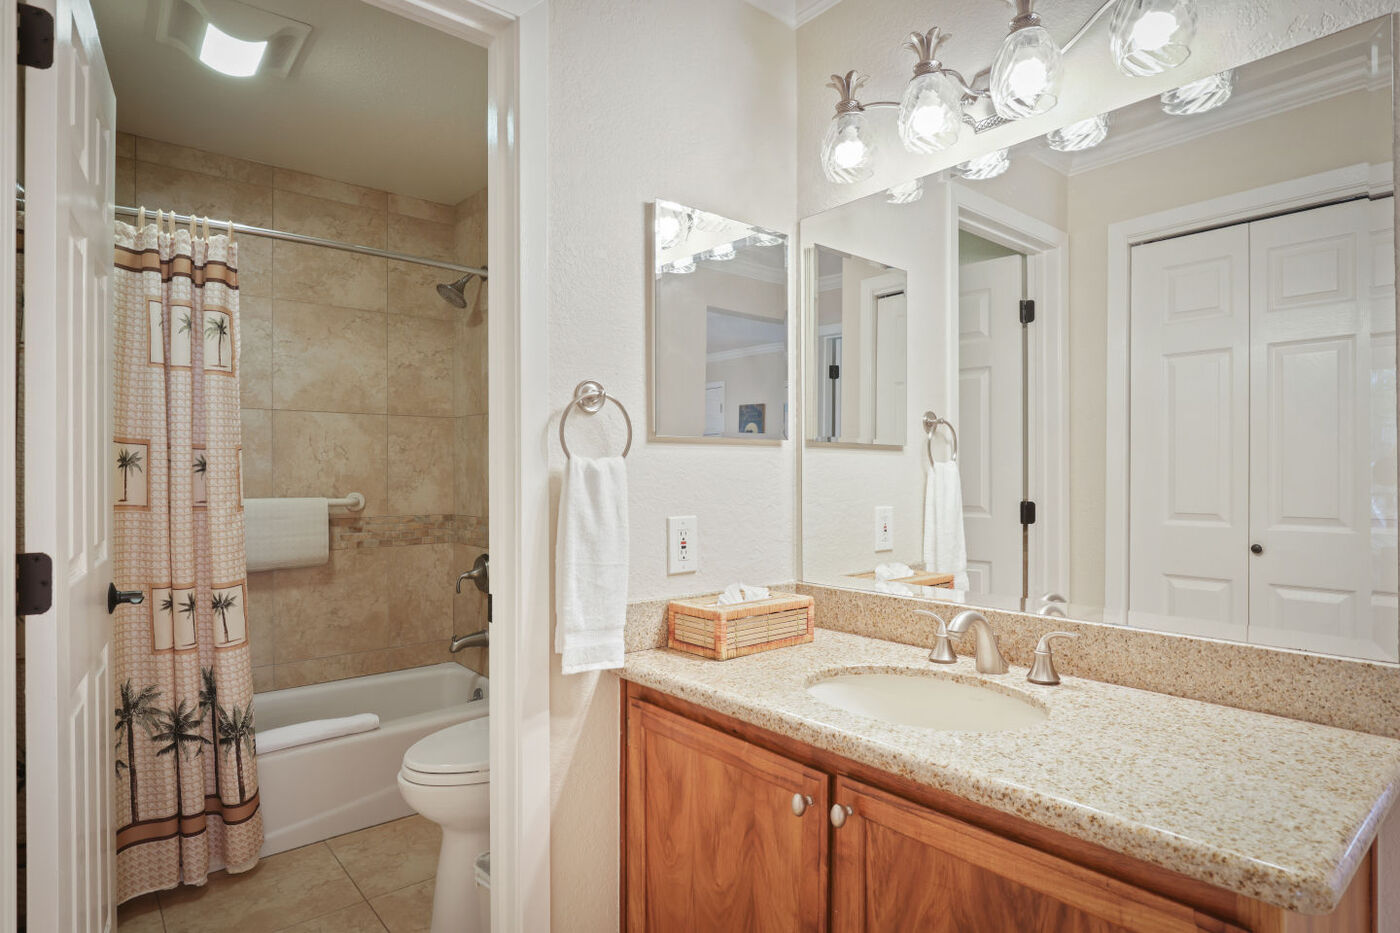 Bathroom with a large mirror and marble countertop a bathtub with shower combo